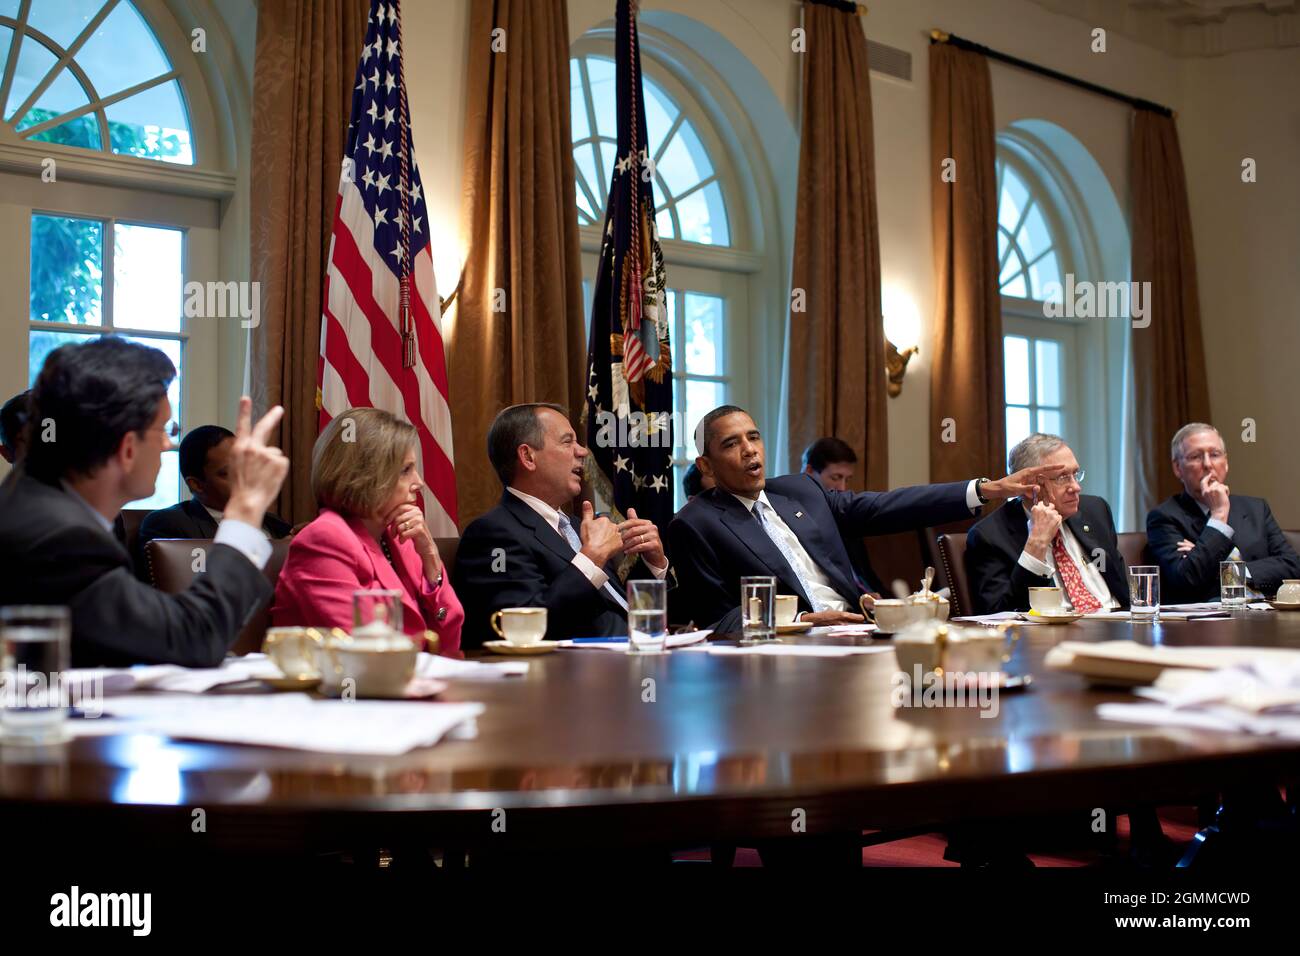 President Barack Obama meets with Congressional Leadership in the Cabinet Room of the White House to discuss ongoing efforts to find a balanced approach to the debt limit and deficit reduction, July 13, 2011. Pictured, from left, are: House Majority Leader Eric Cantor, House Minority Leader Nancy Pelosi, House Speaker John Boehner, Senate Majority Leader Harry Reid, and Senate Minority Leader Mitch McConnell. (Official White House Photo by Pete Souza) This official White House photograph is being made available only for publication by news organizations and/or for personal use printing by the Stock Photo